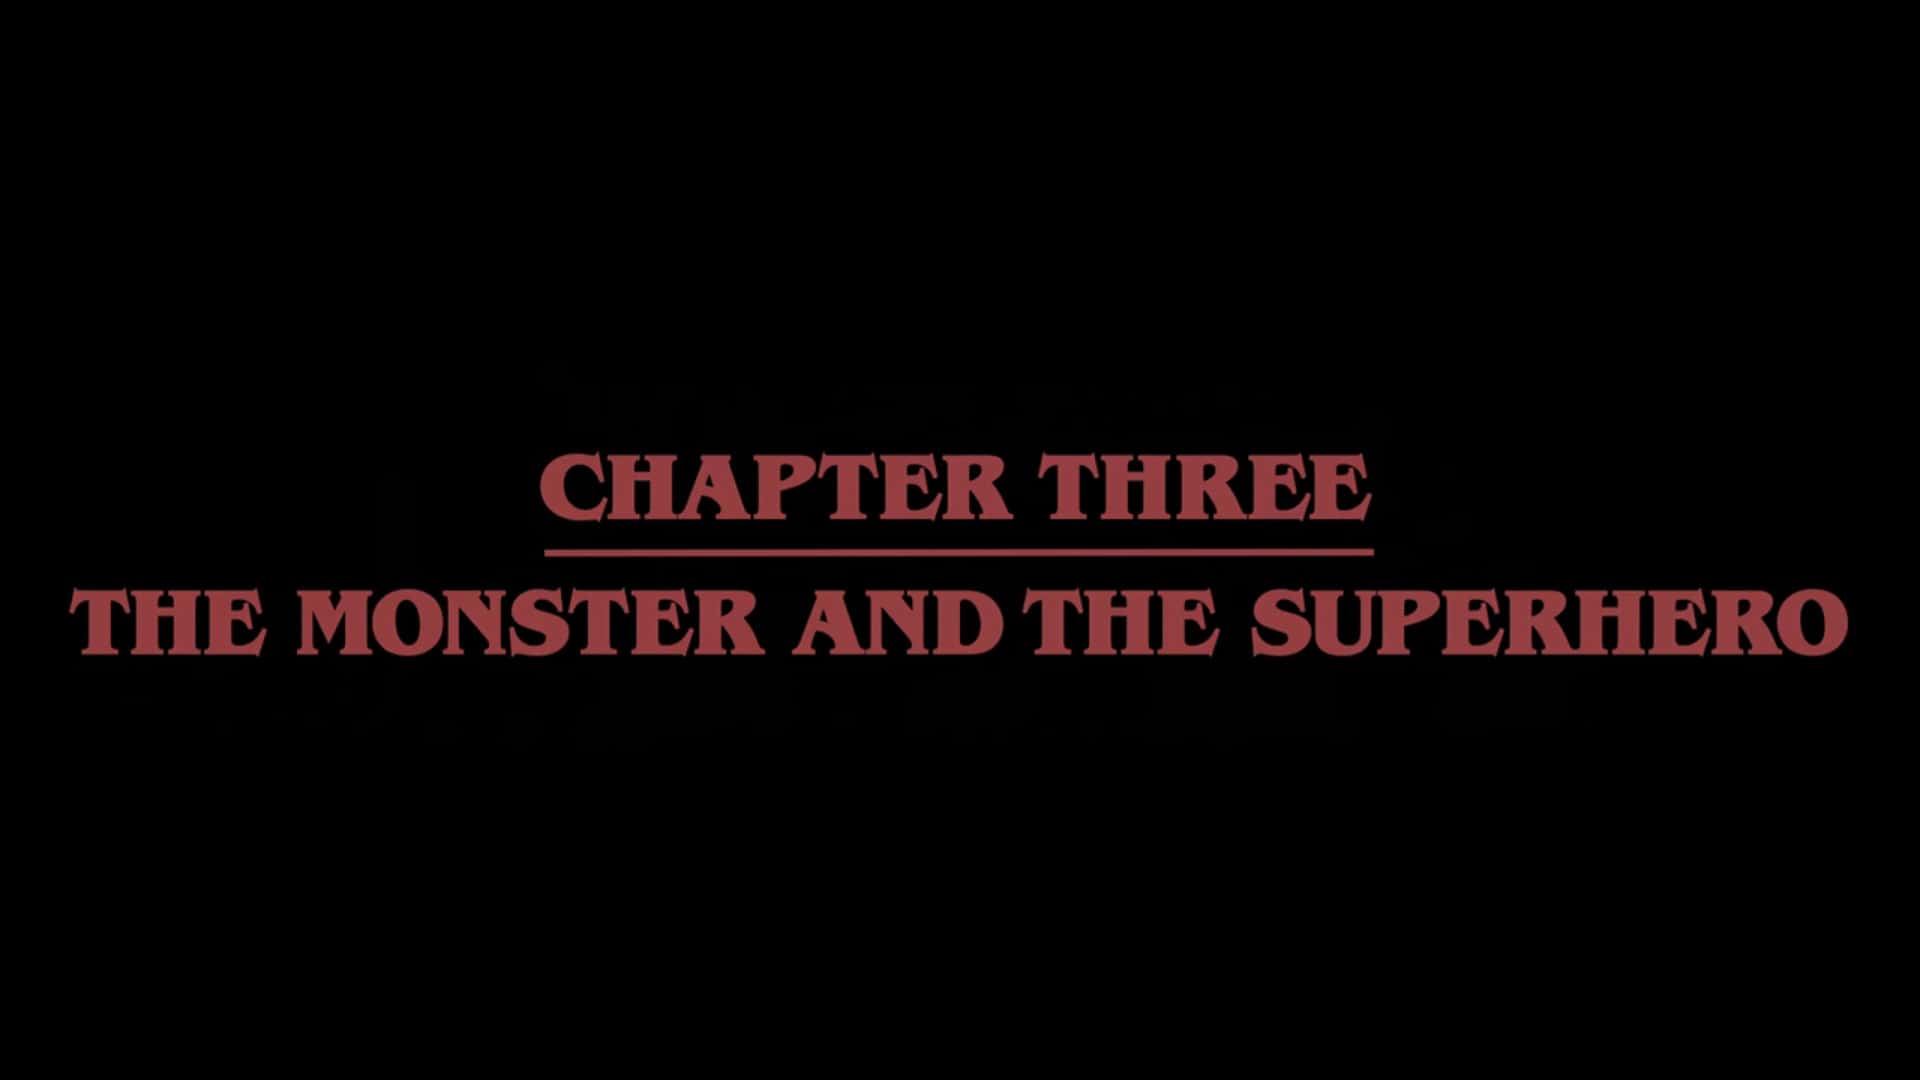 Title Card - Stranger Things Season 4 Episode 3 “Chapter Three The Monster and the Super Hero”